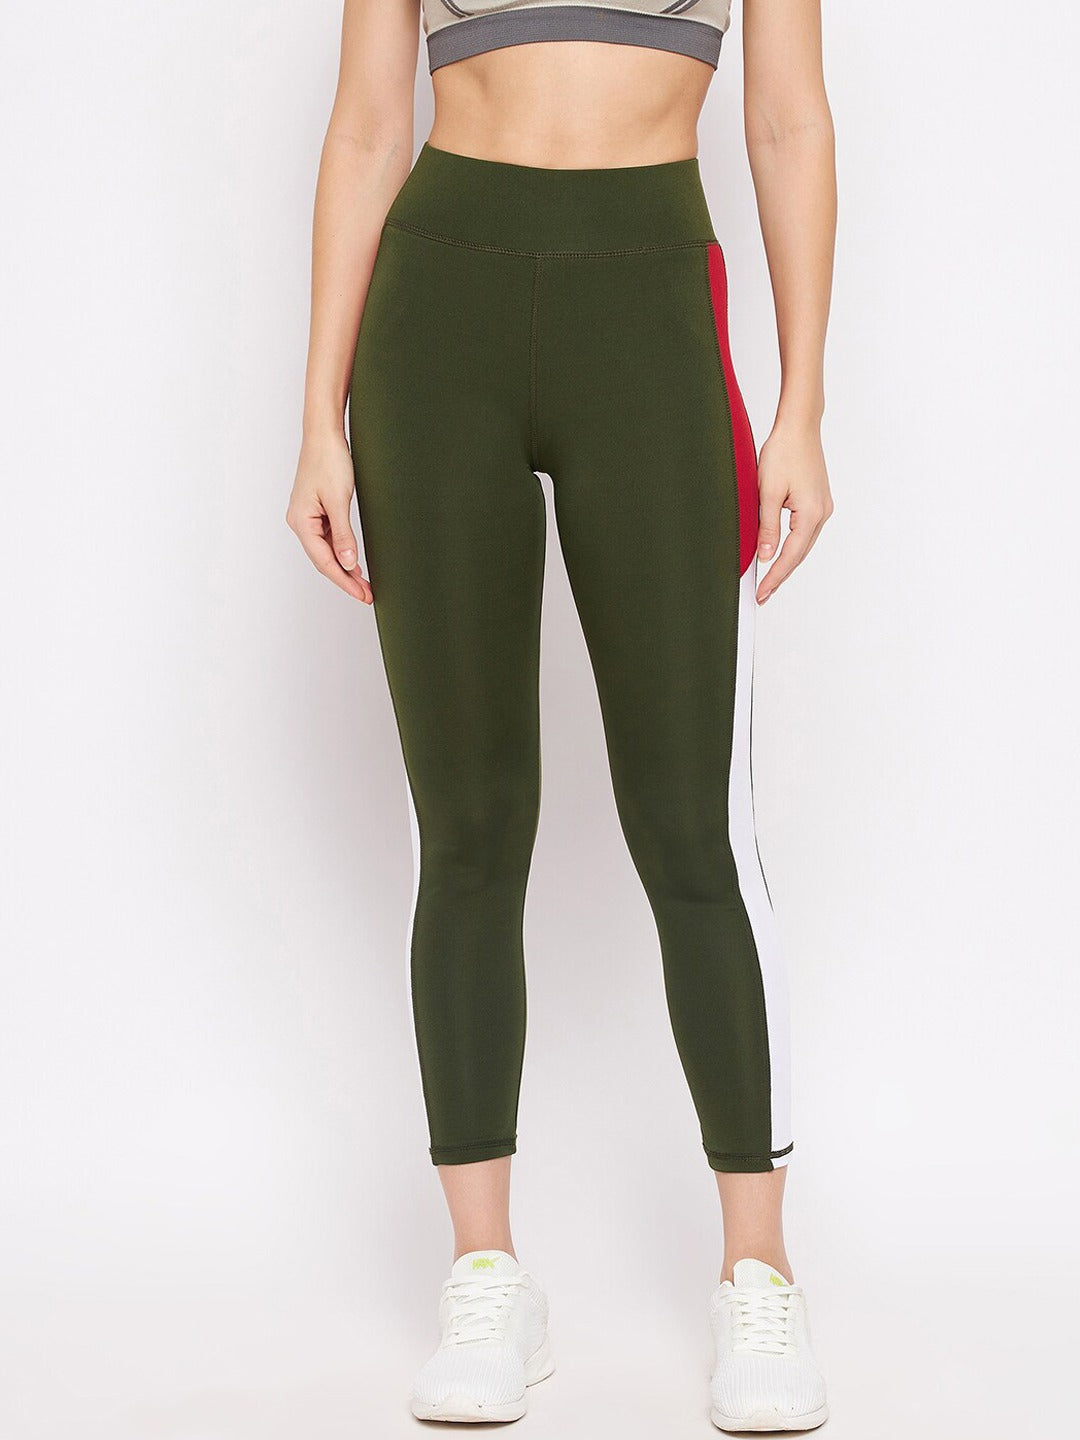 Nine ways to rock your olive-colored leggings - Style with Char Studio